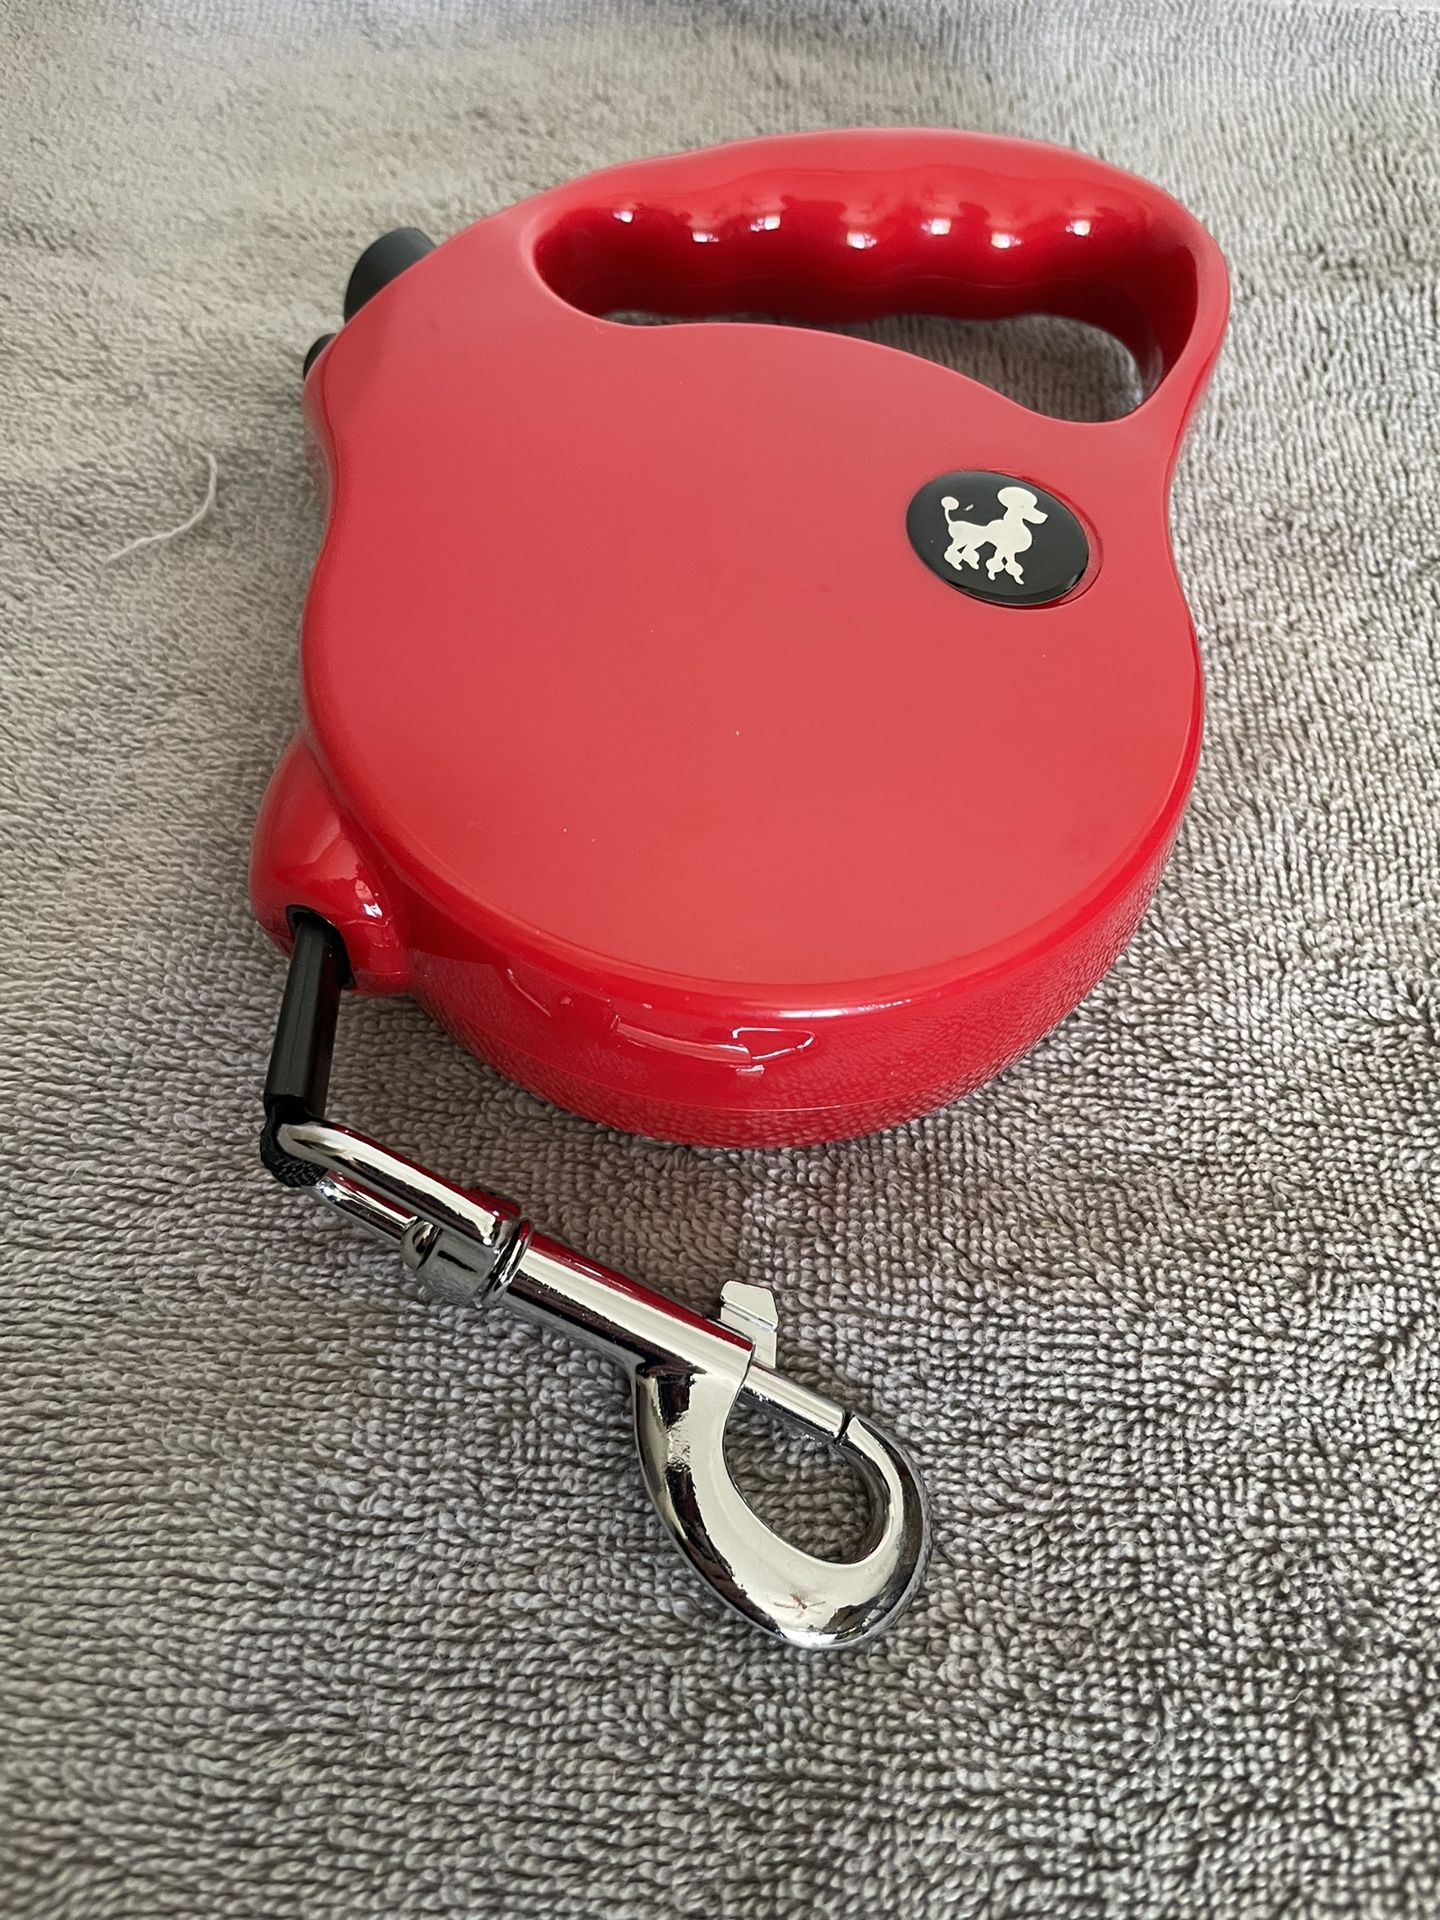 Retractable Red Leash About 20ft Long 